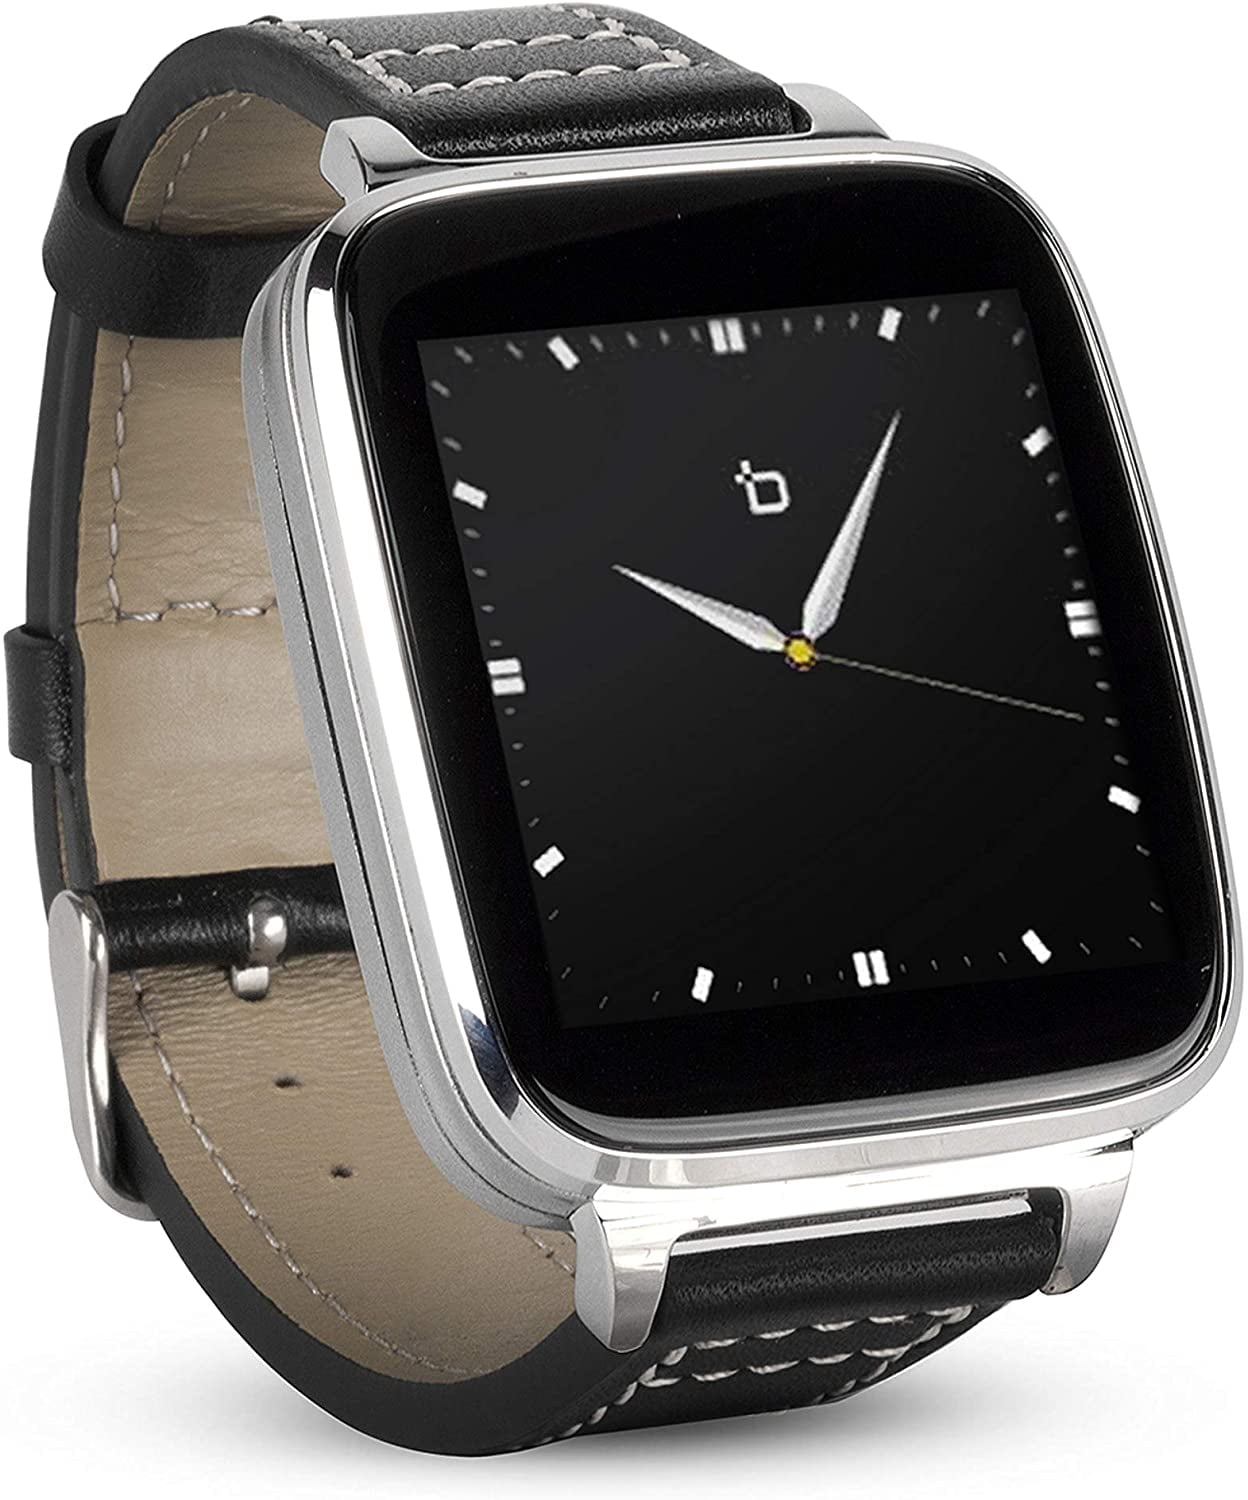 Opheldering Beer Humaan BIT BEANTECH Full Function Smart Watch for Apple/Android Devices. Classical  Elegance with Communications Fitness Music Camera Control. Silver with  Black Calfskin Leather Strap (Black) - Walmart.com